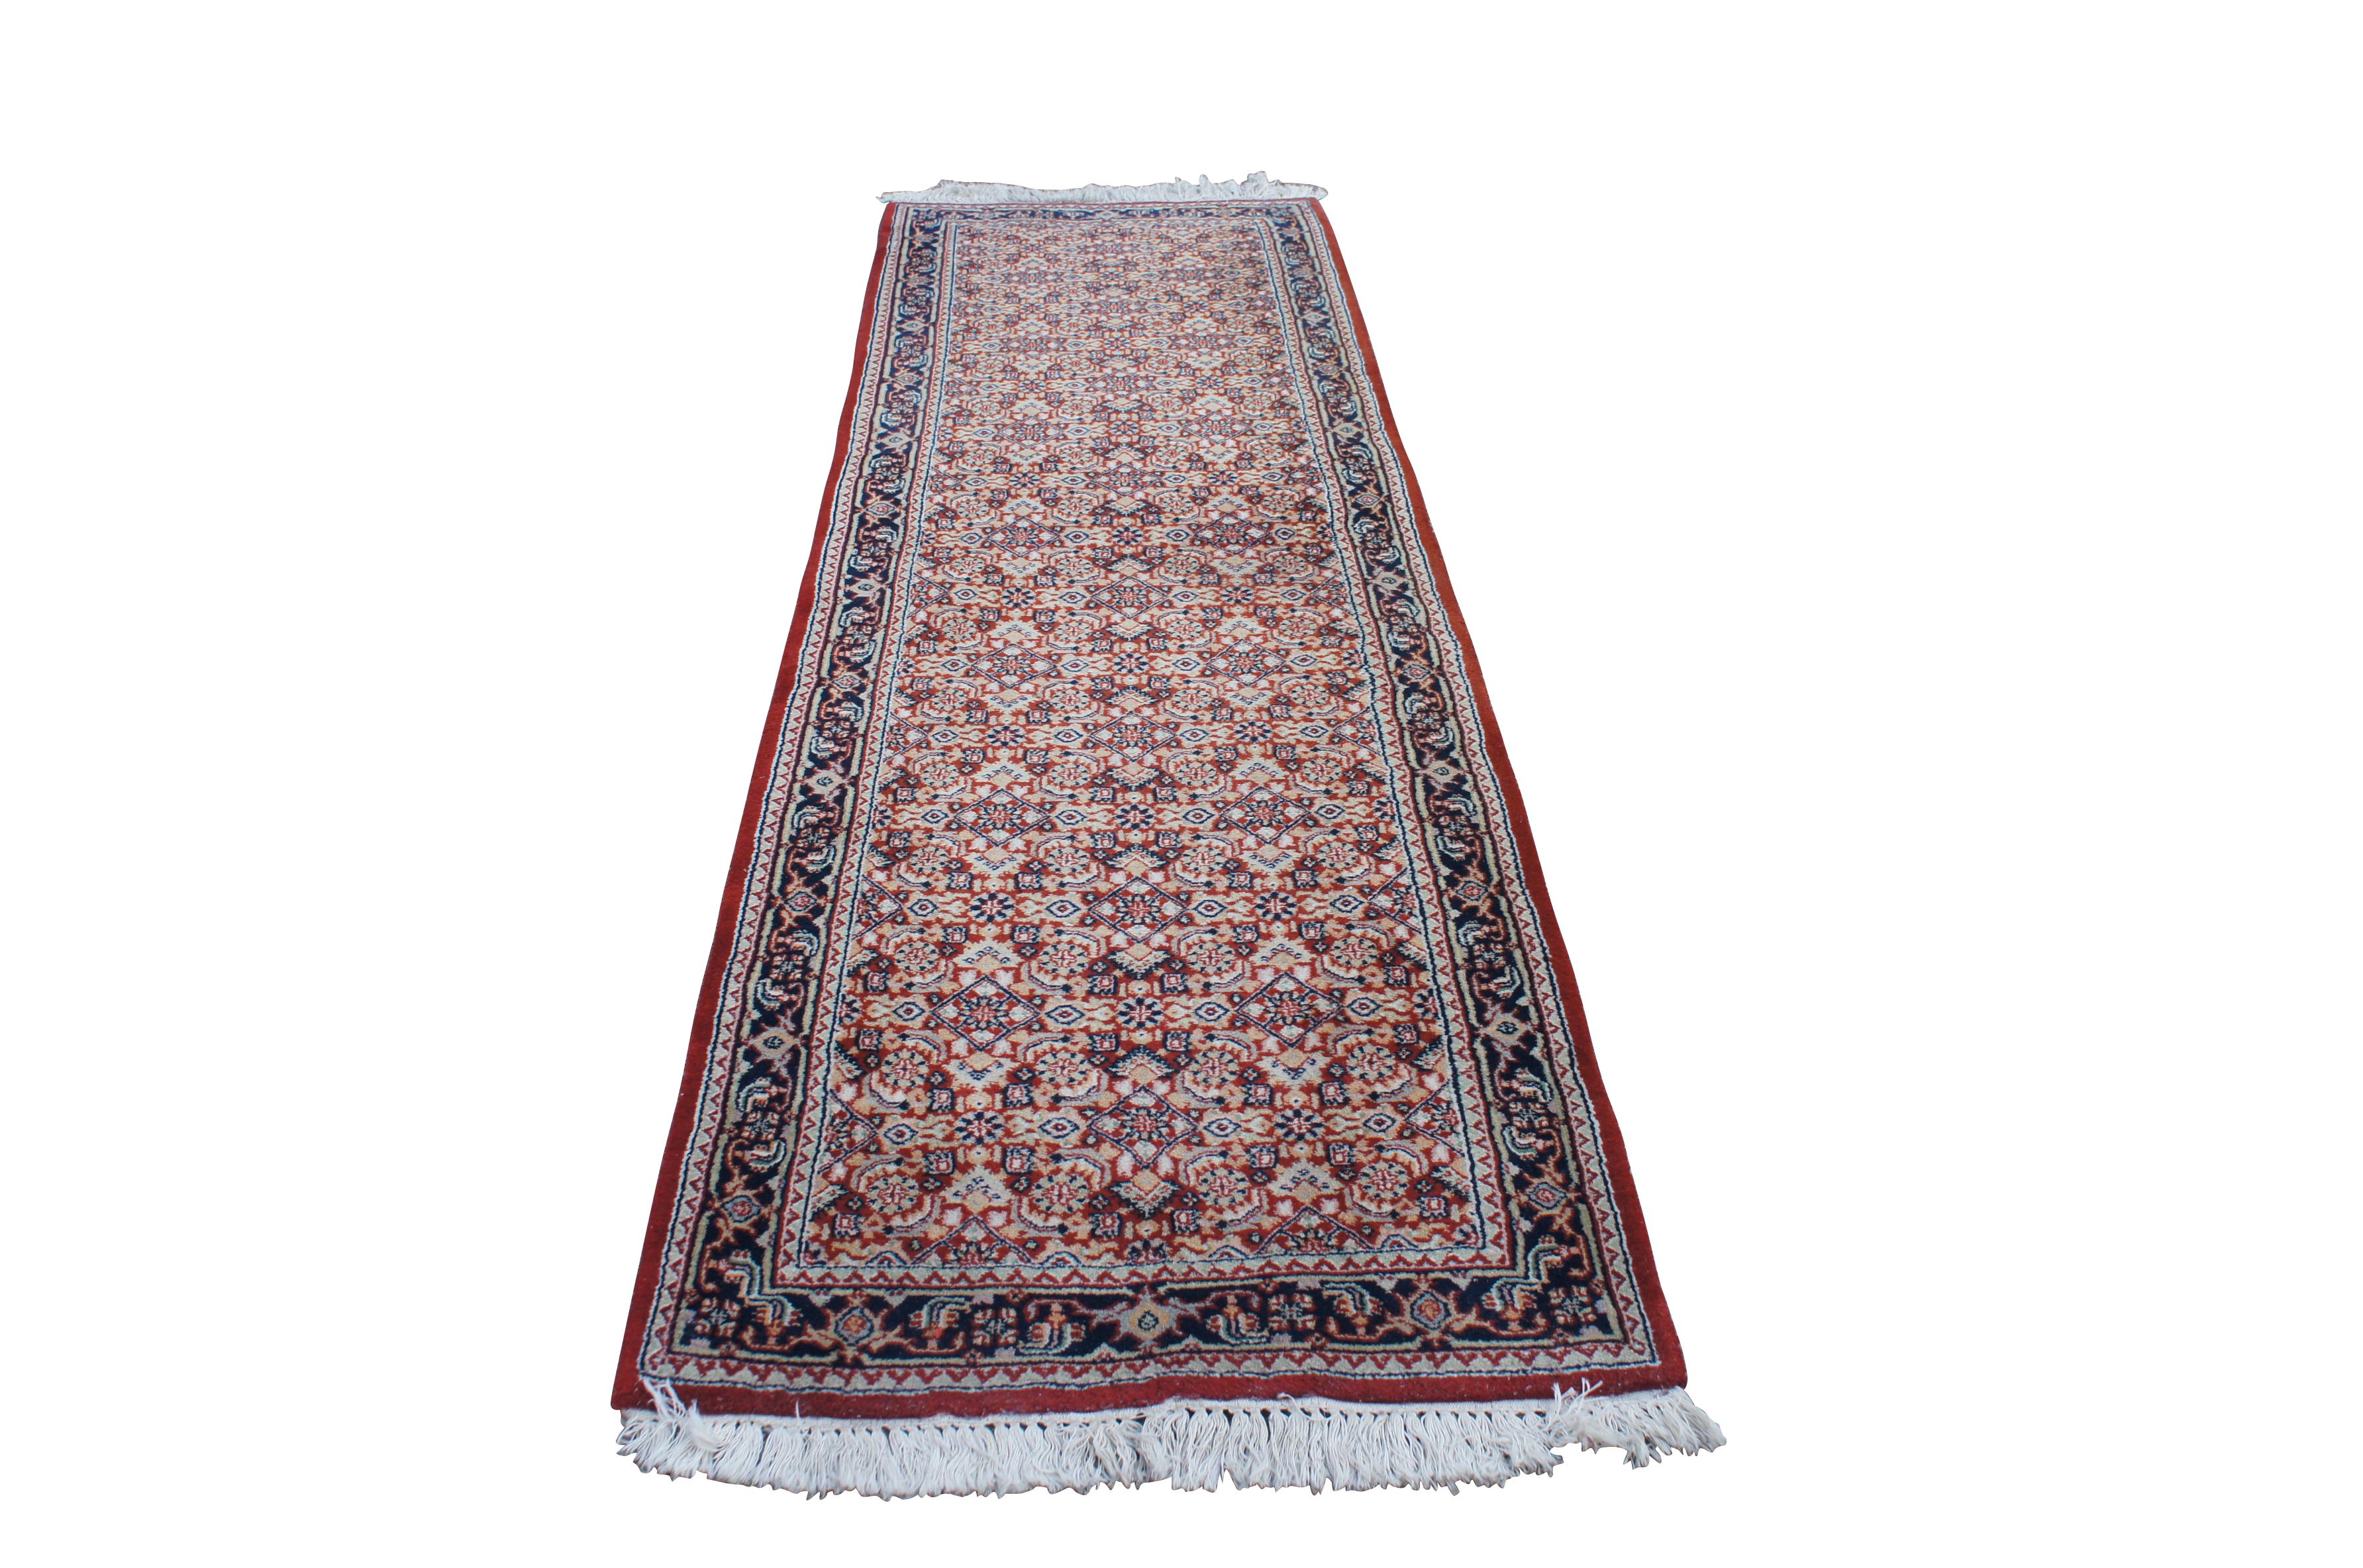 Vintage Indo-Tabriz Hand Knotted Wool Red & Blue Runner Rug 2.5' x 8' In Good Condition For Sale In Dayton, OH